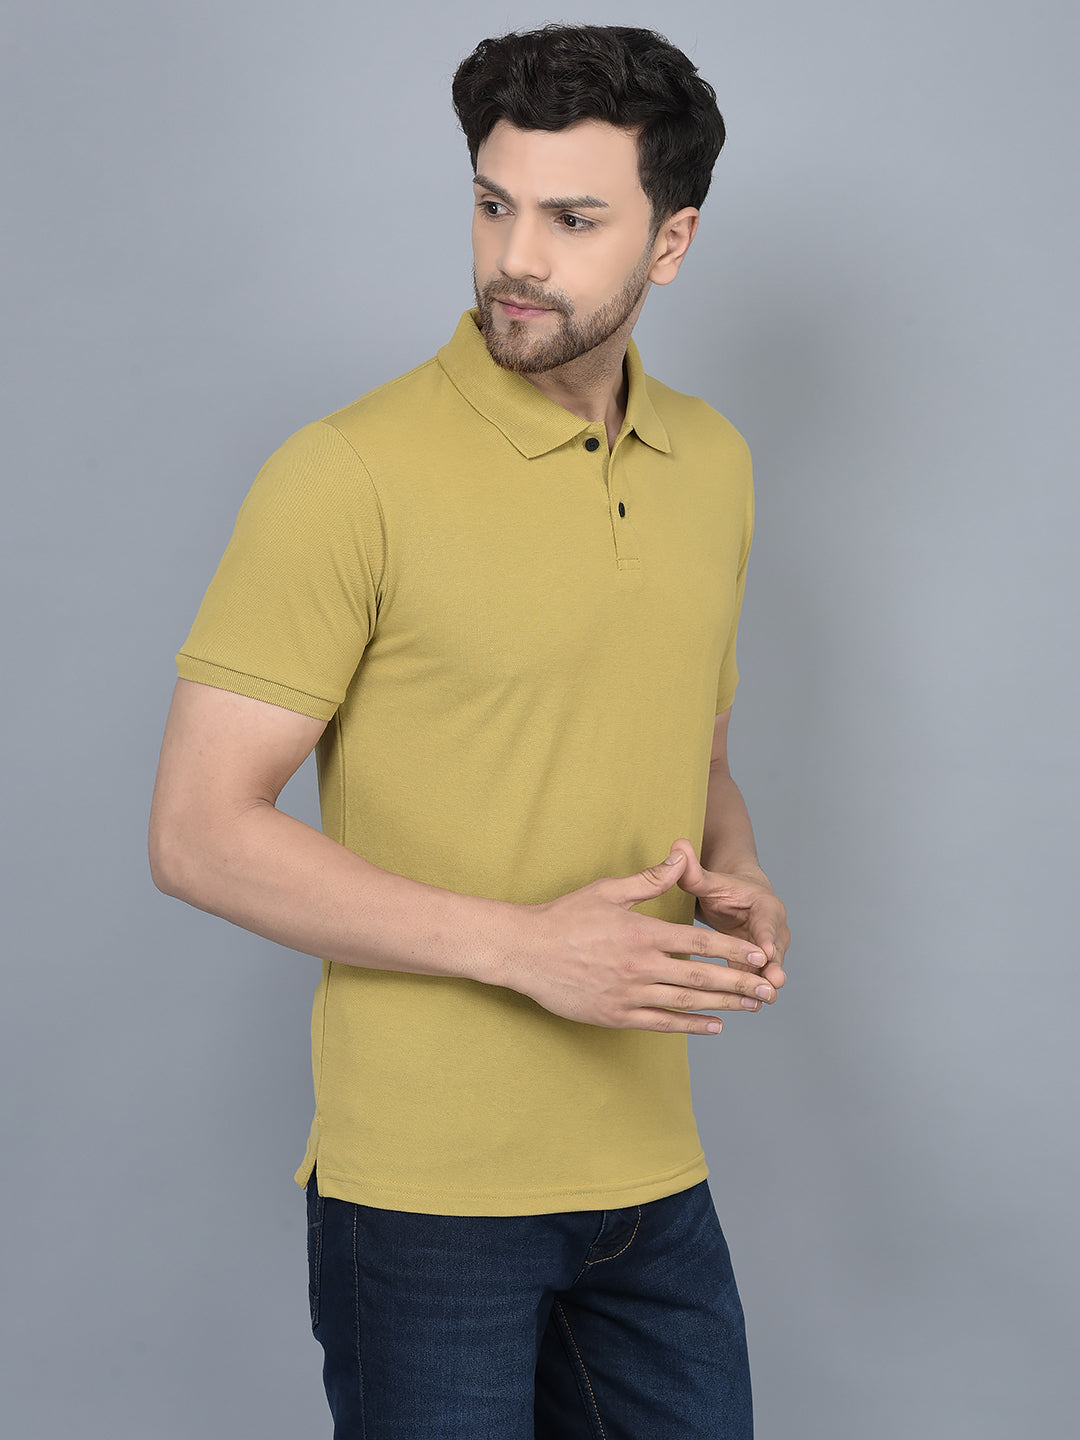 Cobb Mustard Solid Polo Neck T-Shirt